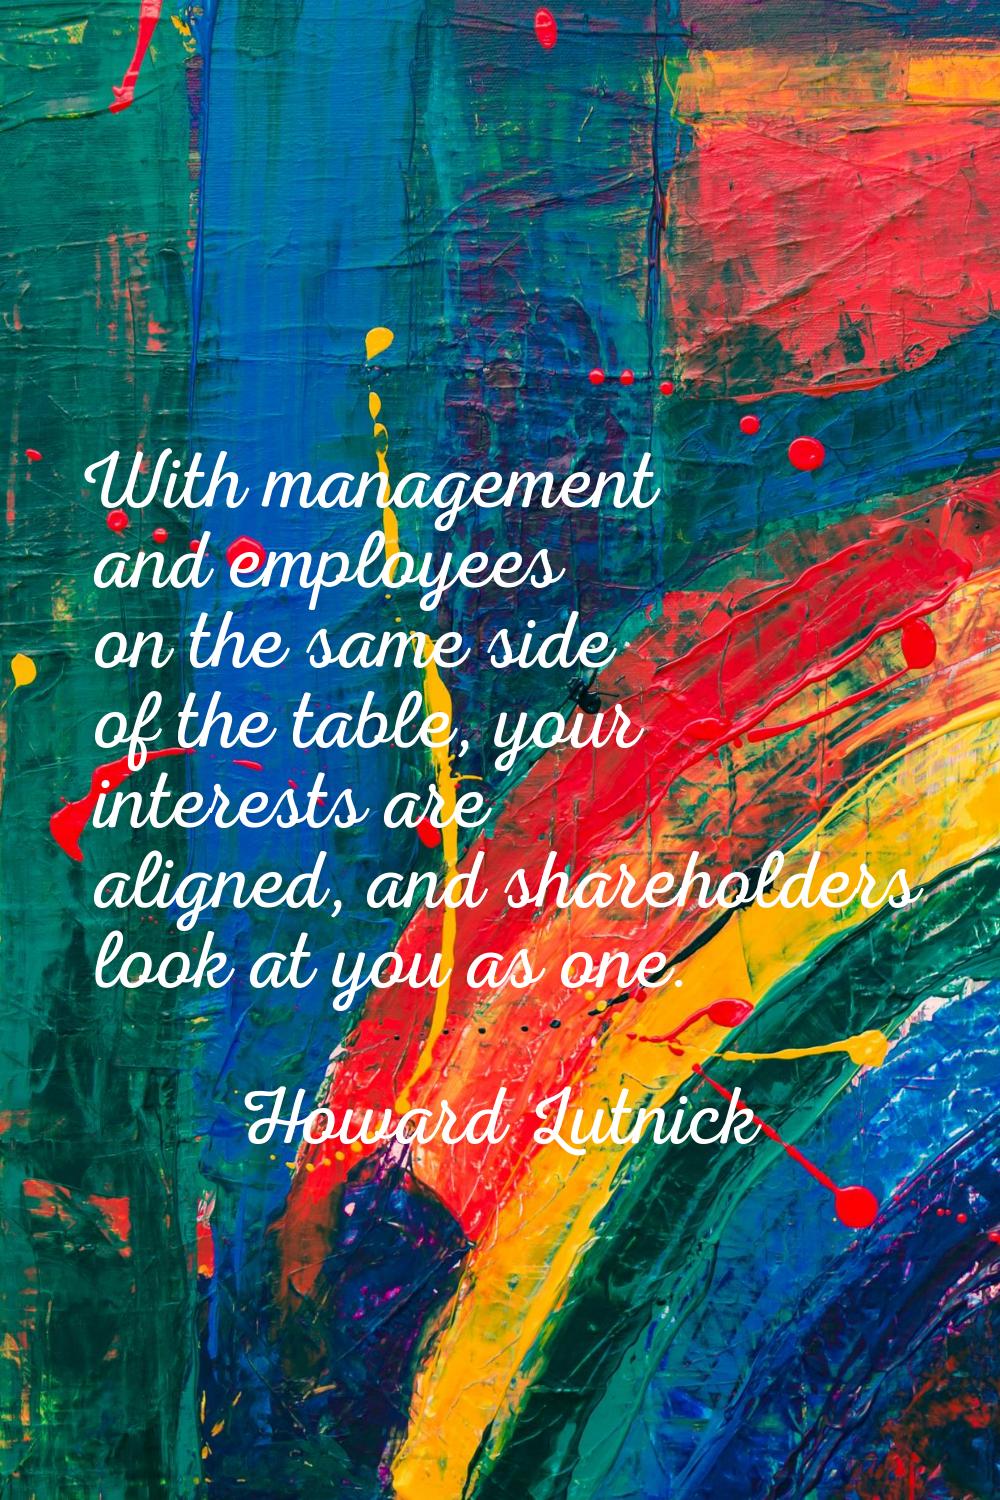 With management and employees on the same side of the table, your interests are aligned, and shareh